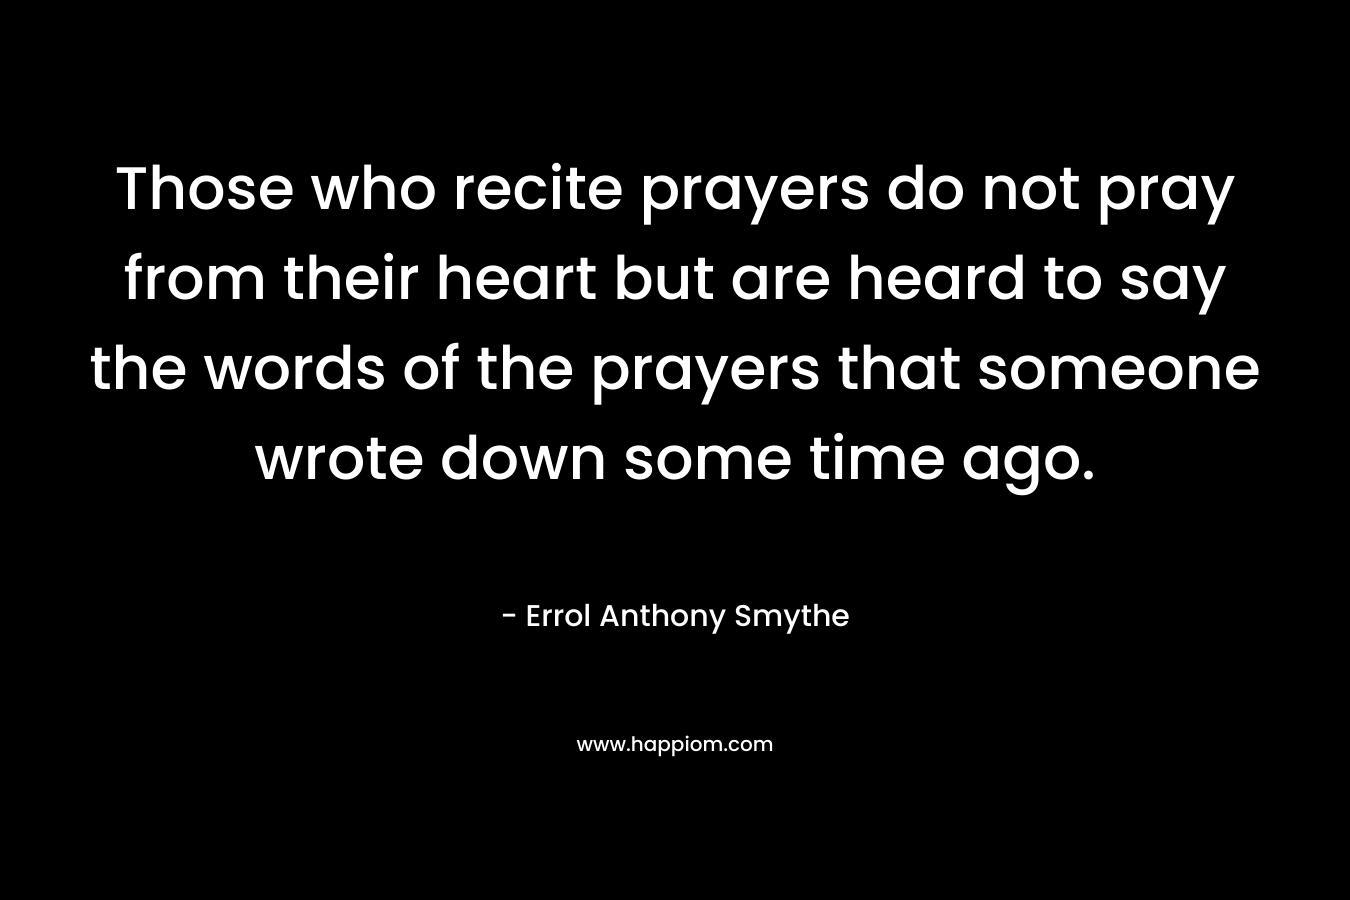 Those who recite prayers do not pray from their heart but are heard to say the words of the prayers that someone wrote down some time ago. – Errol Anthony Smythe